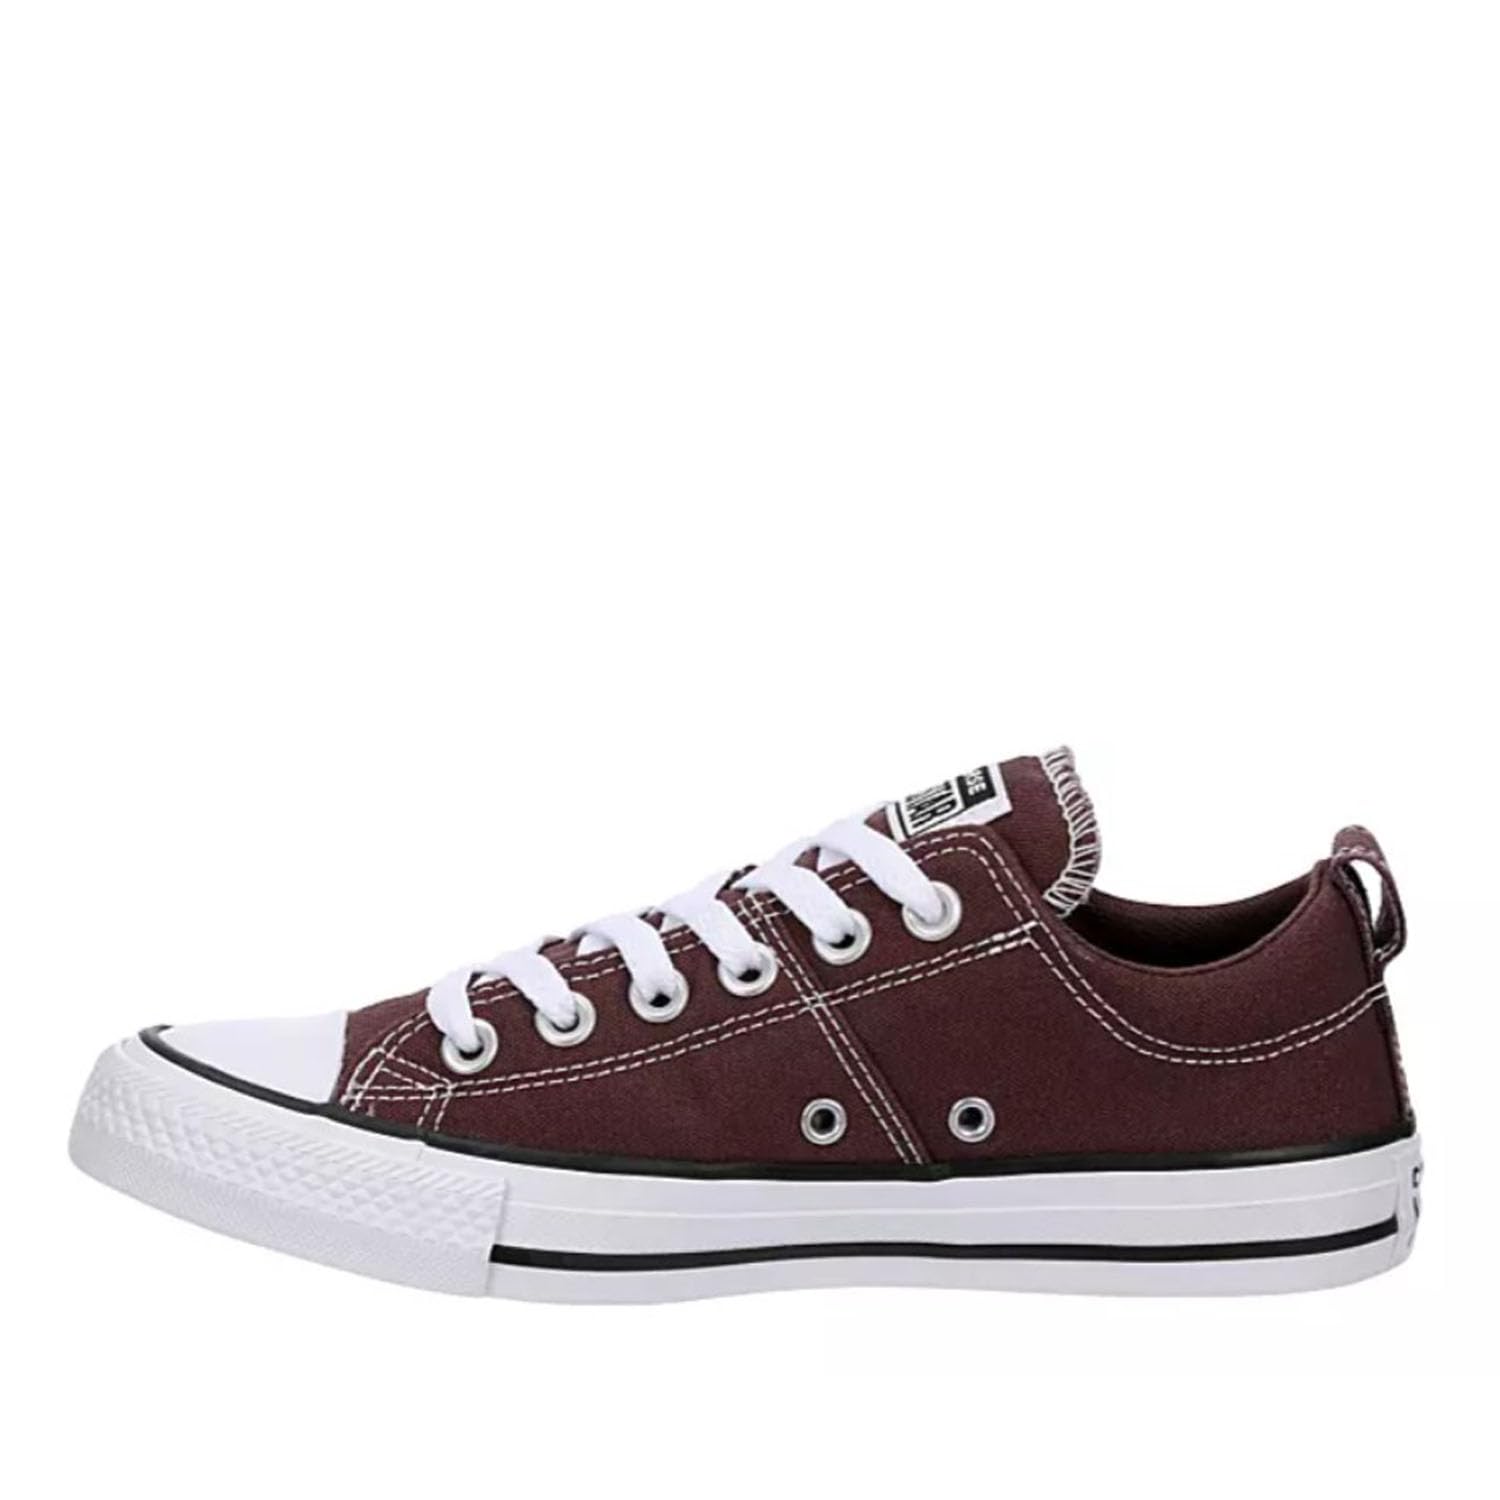 Converse Unisex Chuck Taylor All Star Low - Lace Up Style Sneaker - Madison Ox - Eternal Earthe/White/Black 8